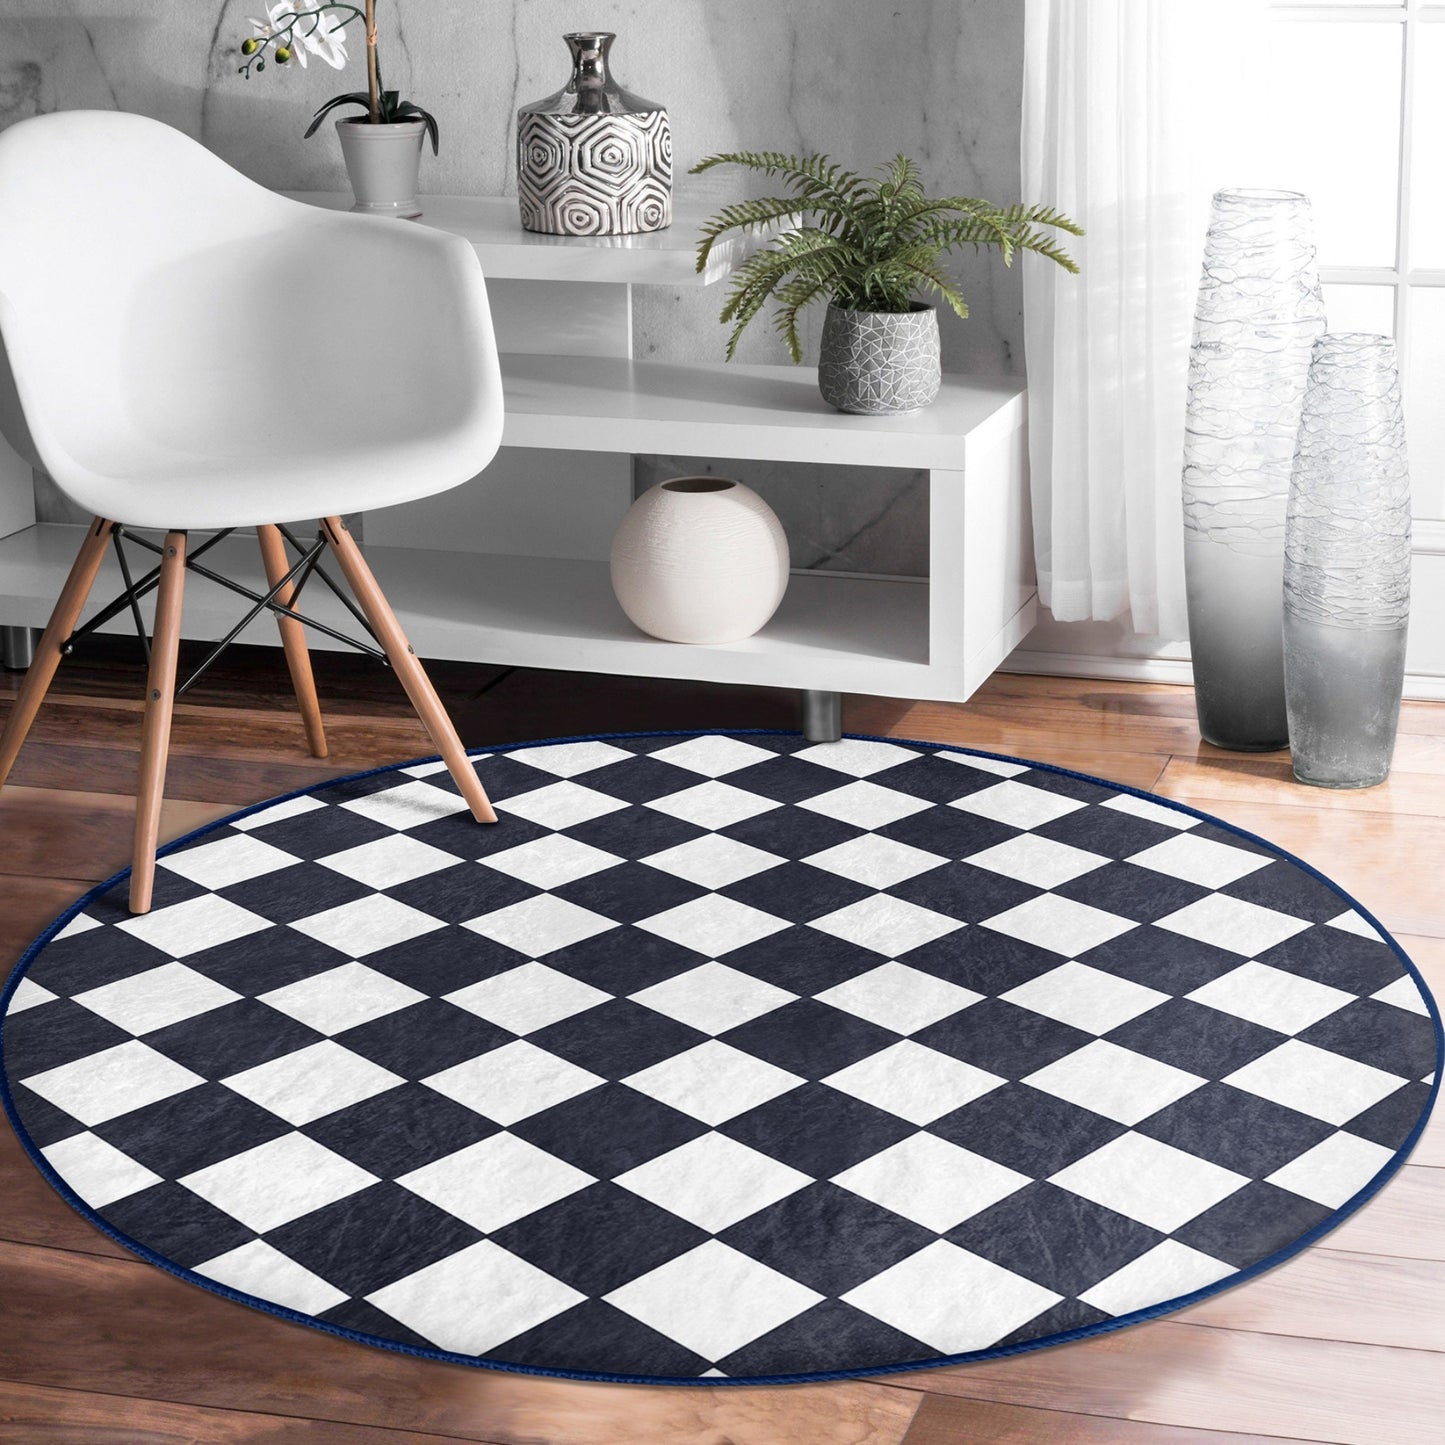 Classic Checkered Pattern Decorative Rug - Timeless Design